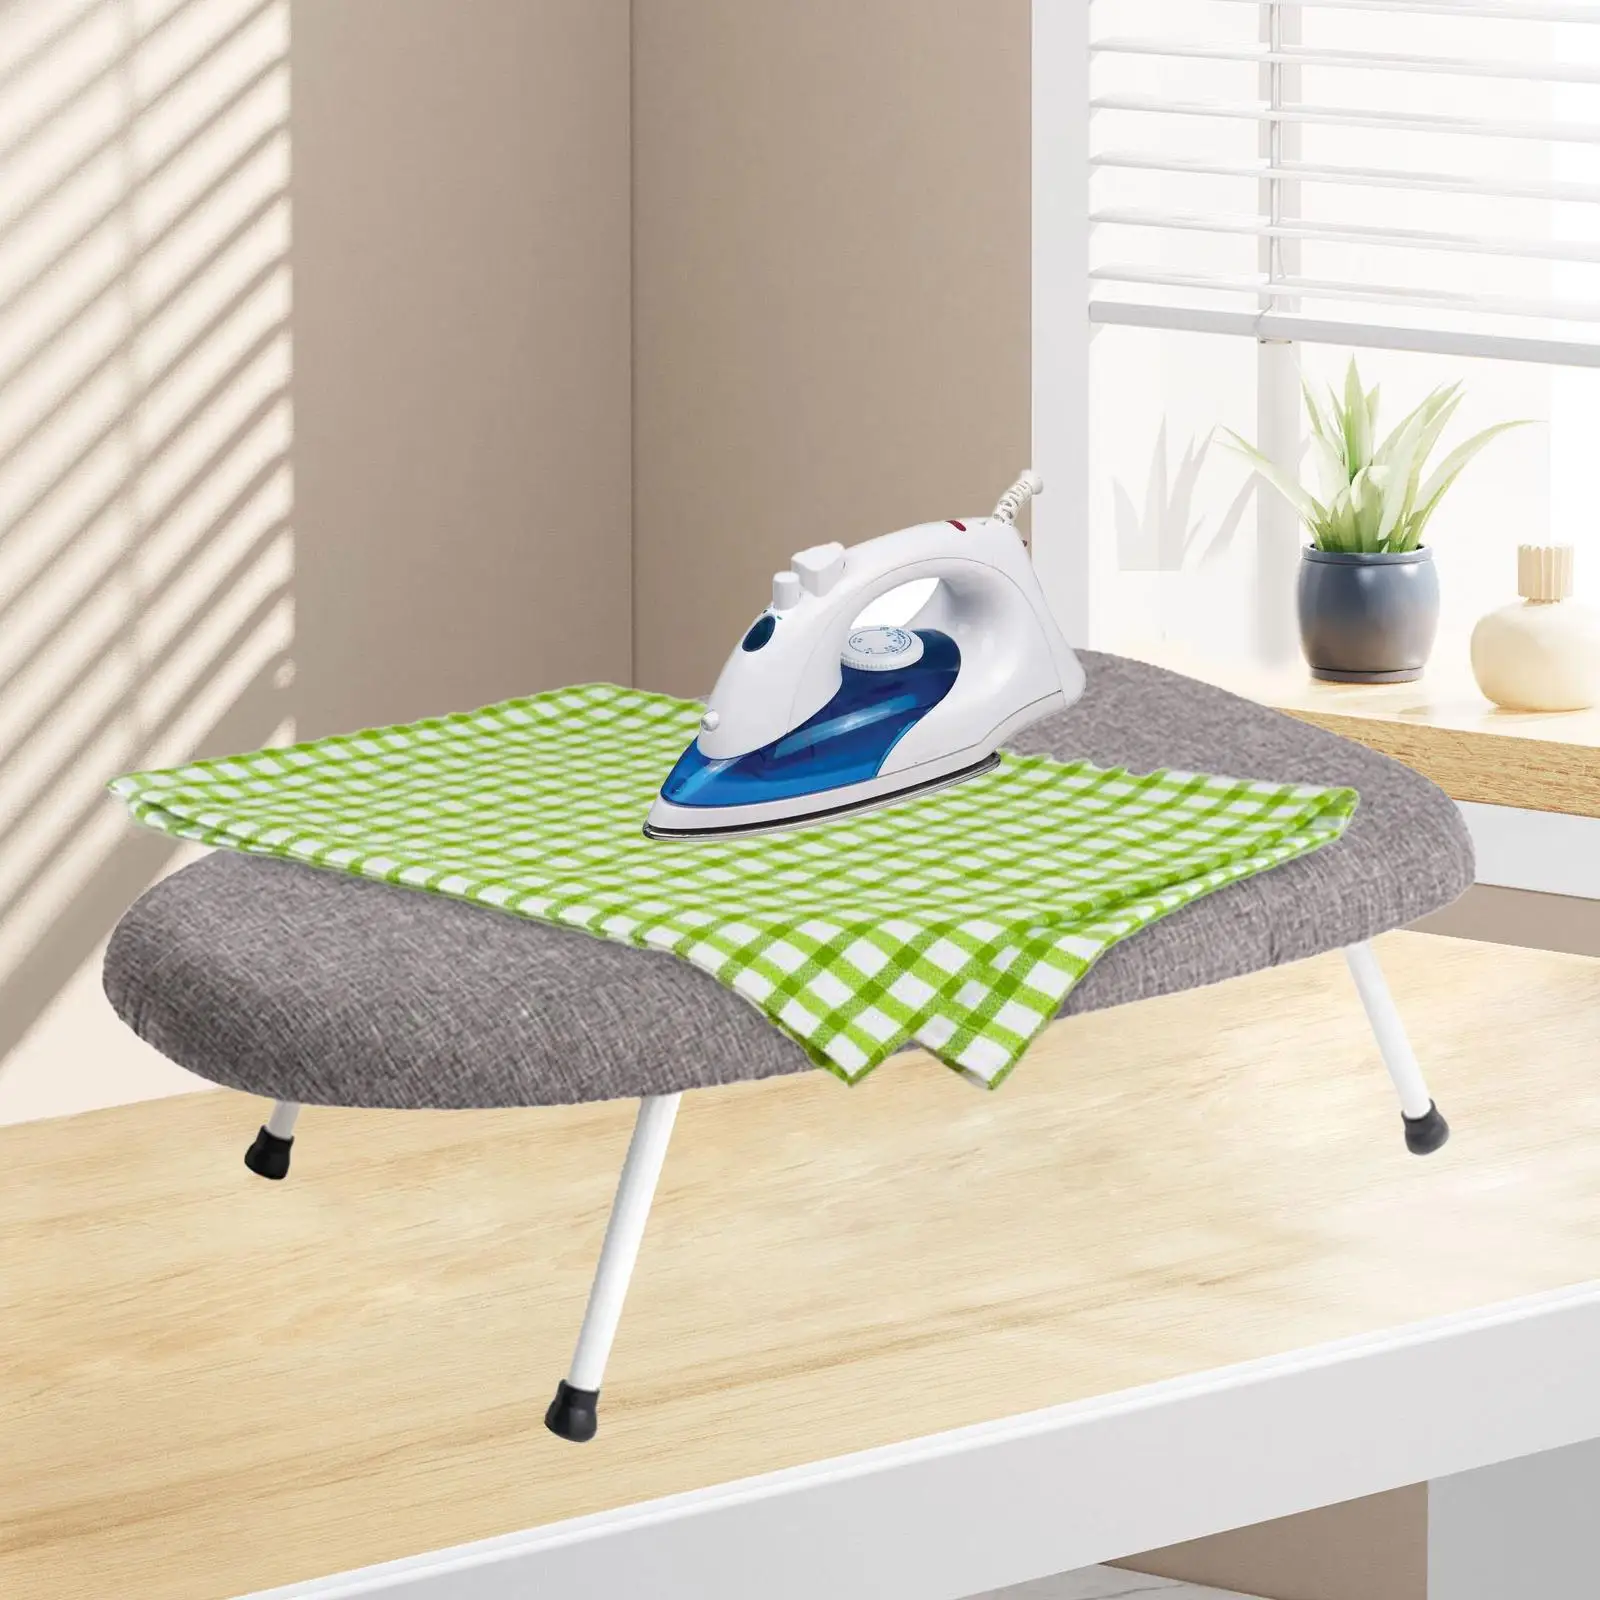 Tabletop Ironing Board Ironing Table Portable for Apartment Dorm Sewing Room